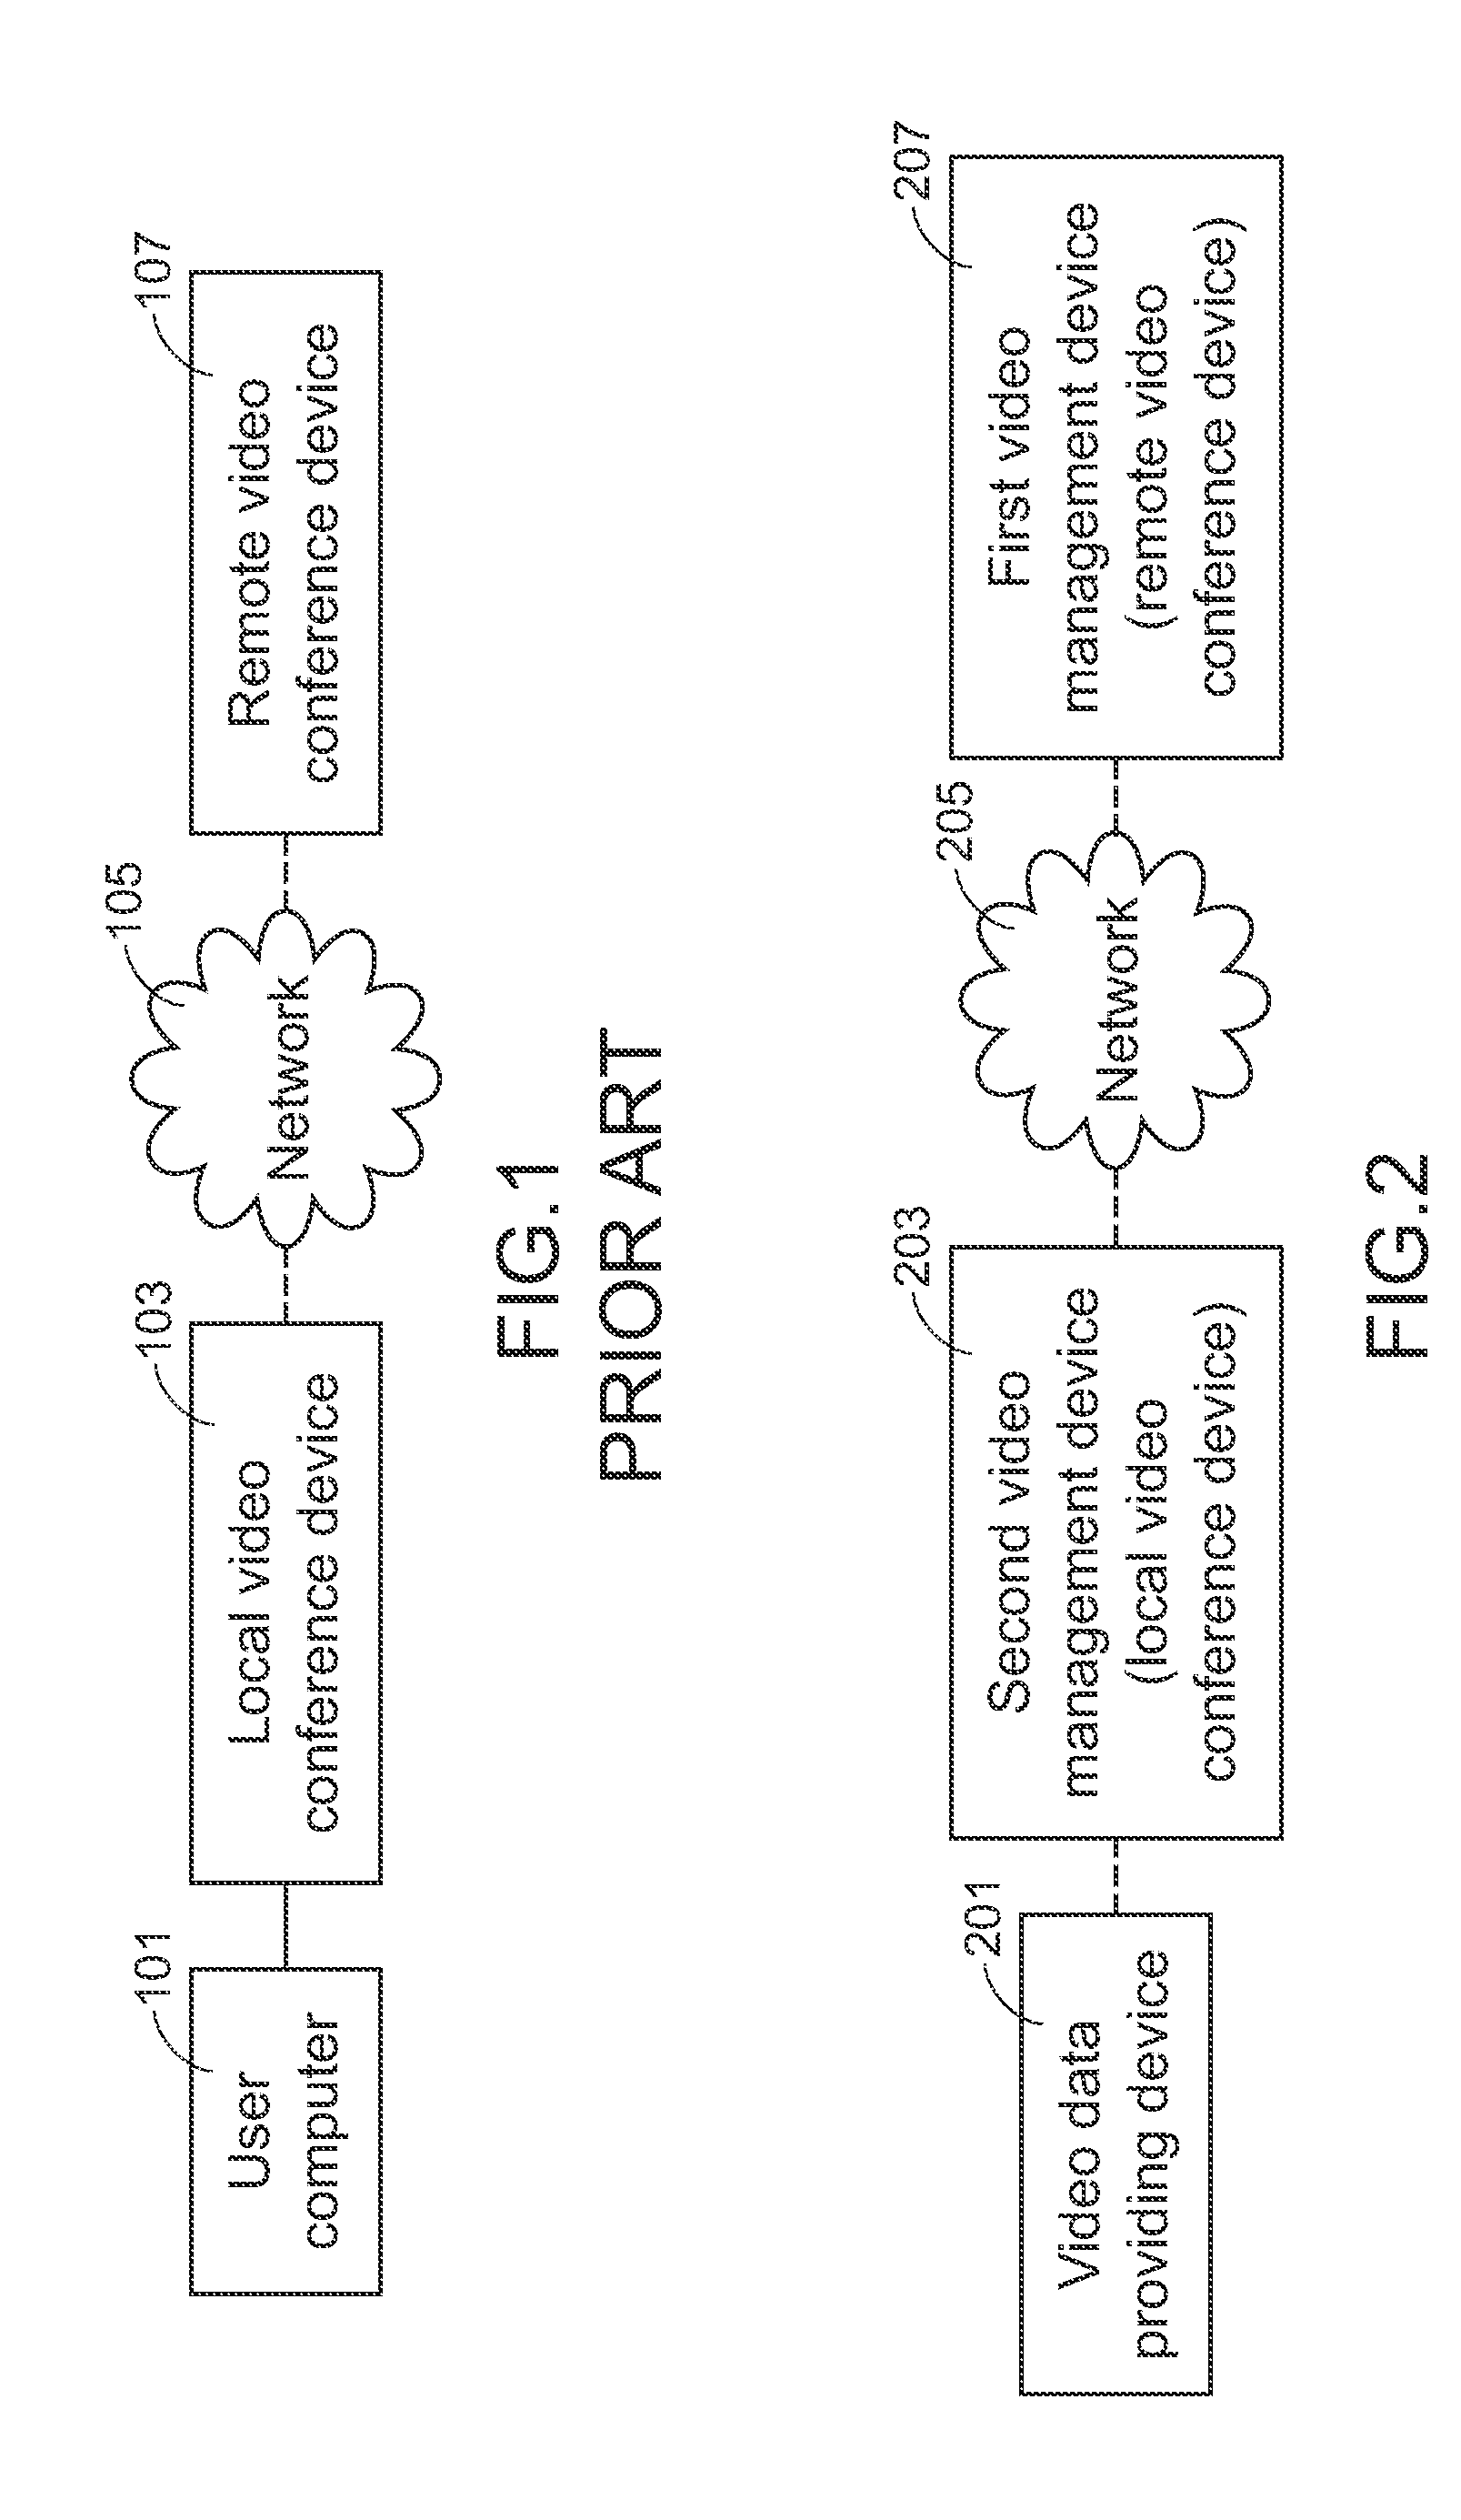 Video transmission method and system